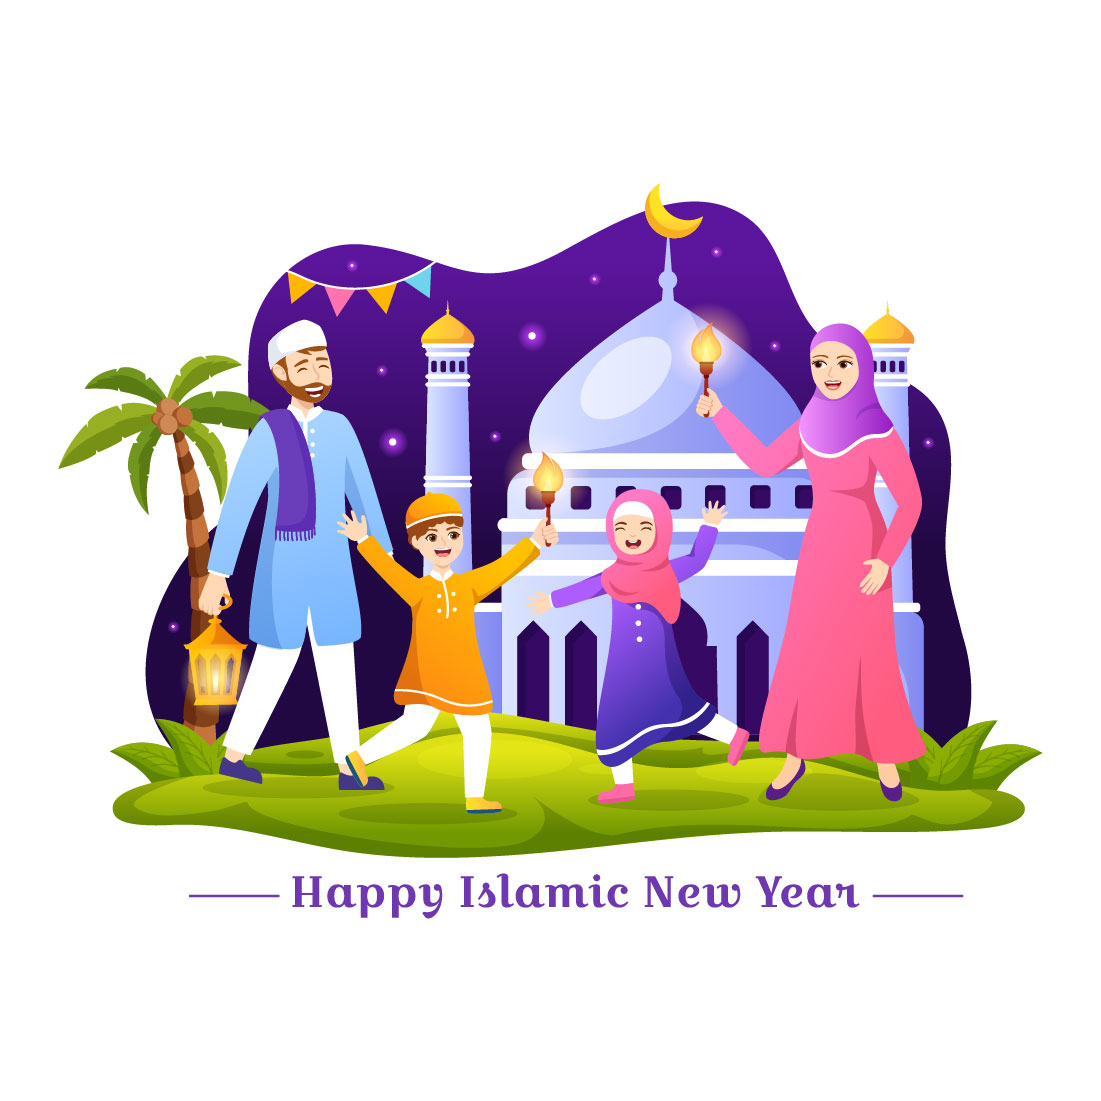 16 Happy Islamic New Year Illustration preview image.